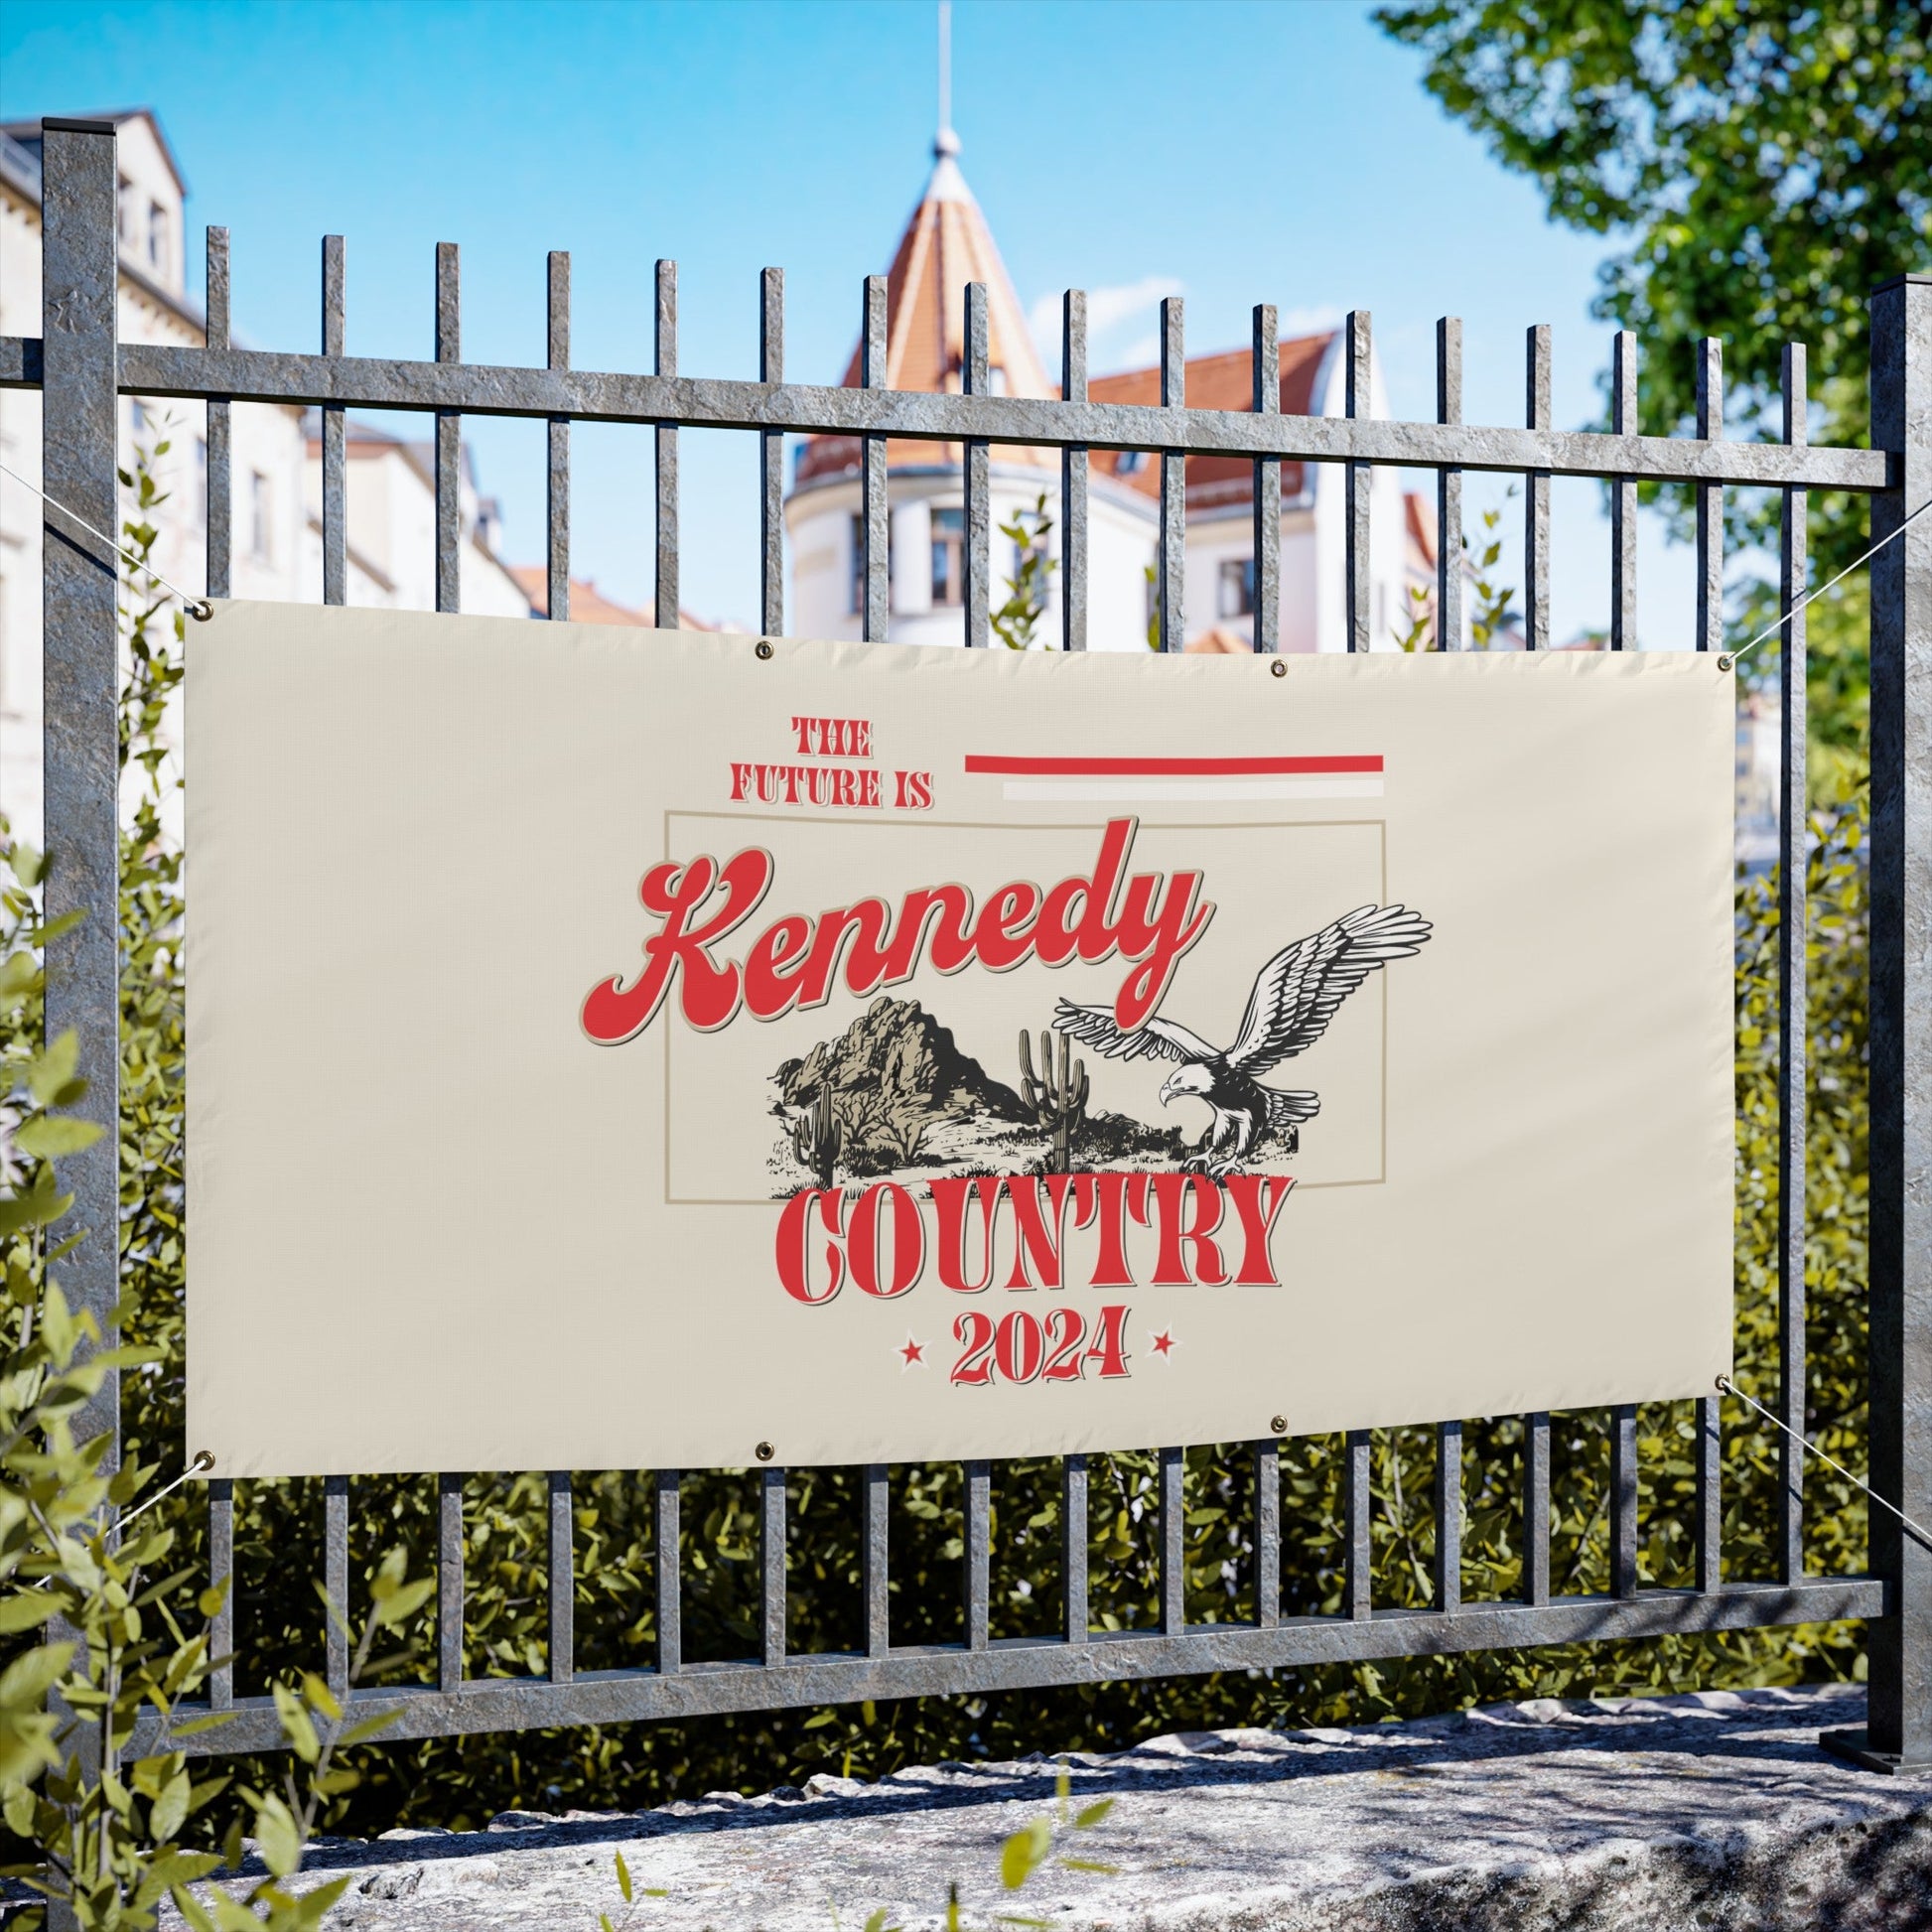 Kennedy Country Vinyl Banner - TEAM KENNEDY. All rights reserved